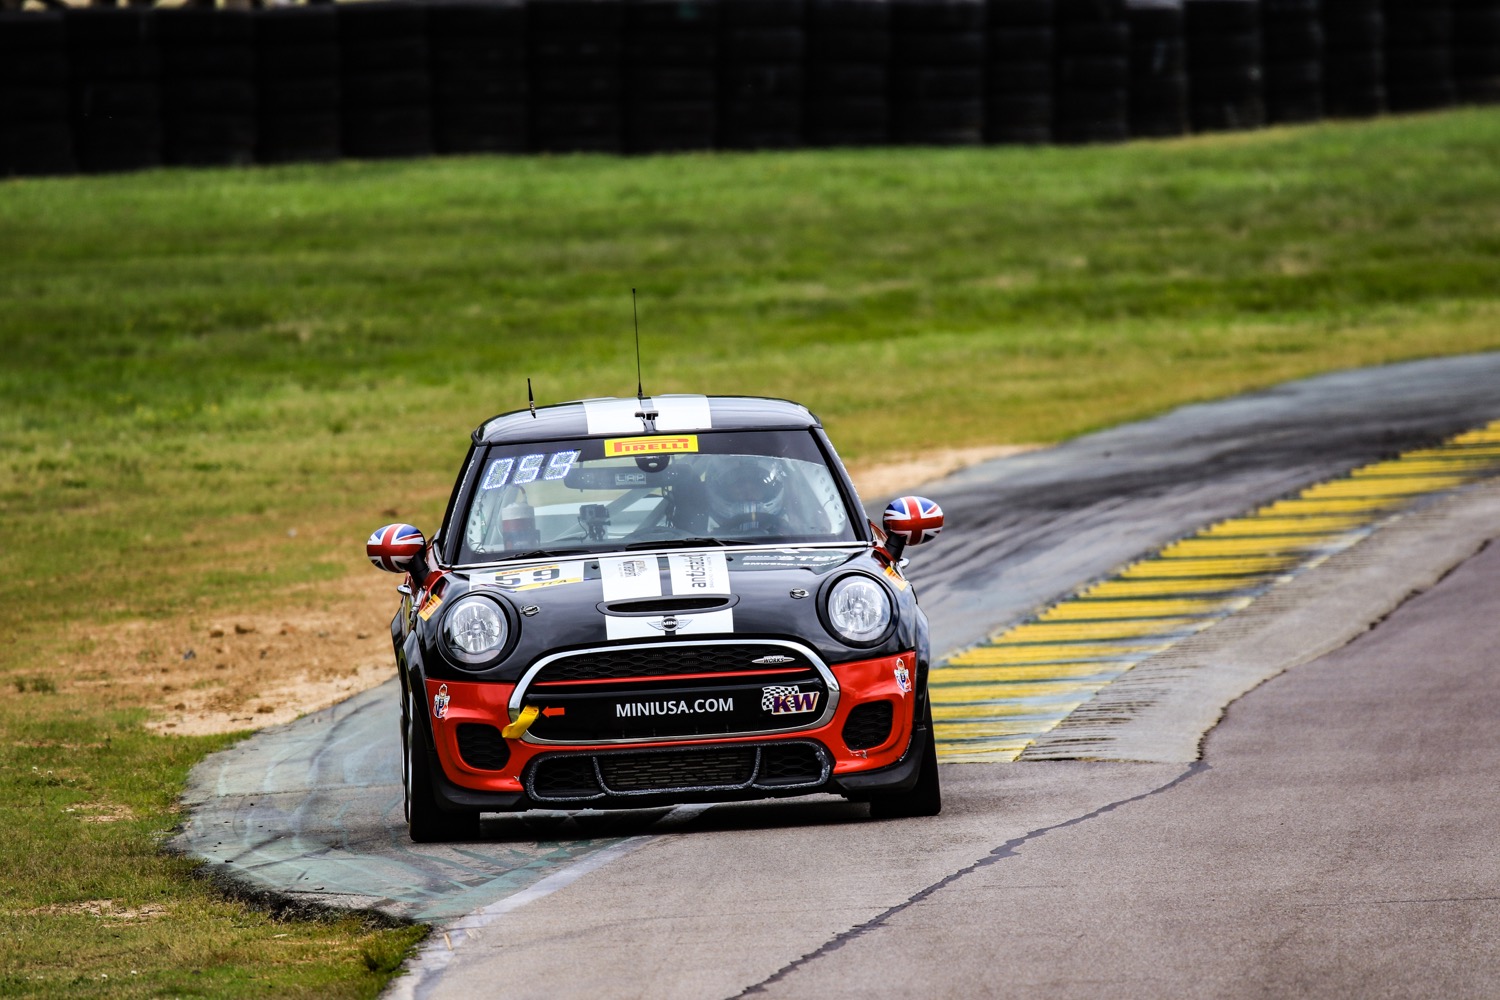 MINI JCW Team Heads to Wine Country